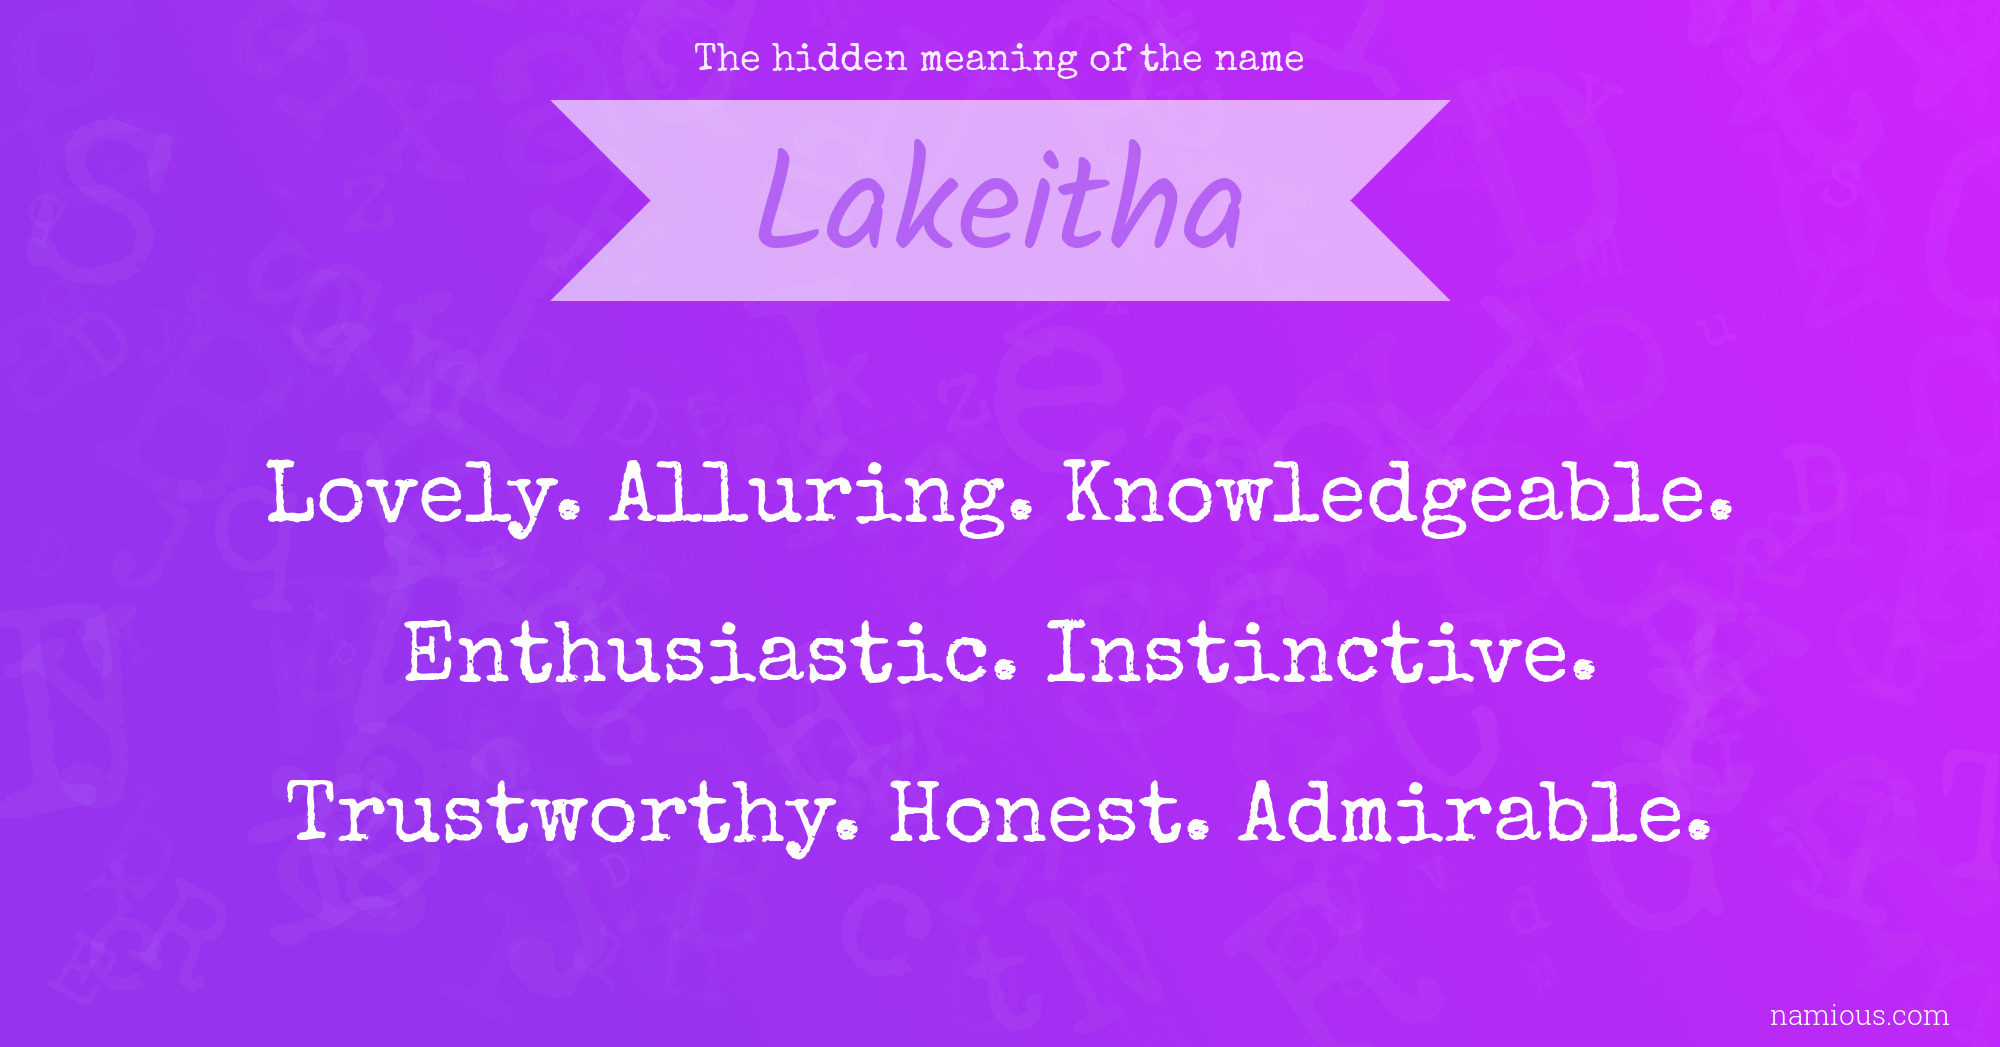 The hidden meaning of the name Lakeitha